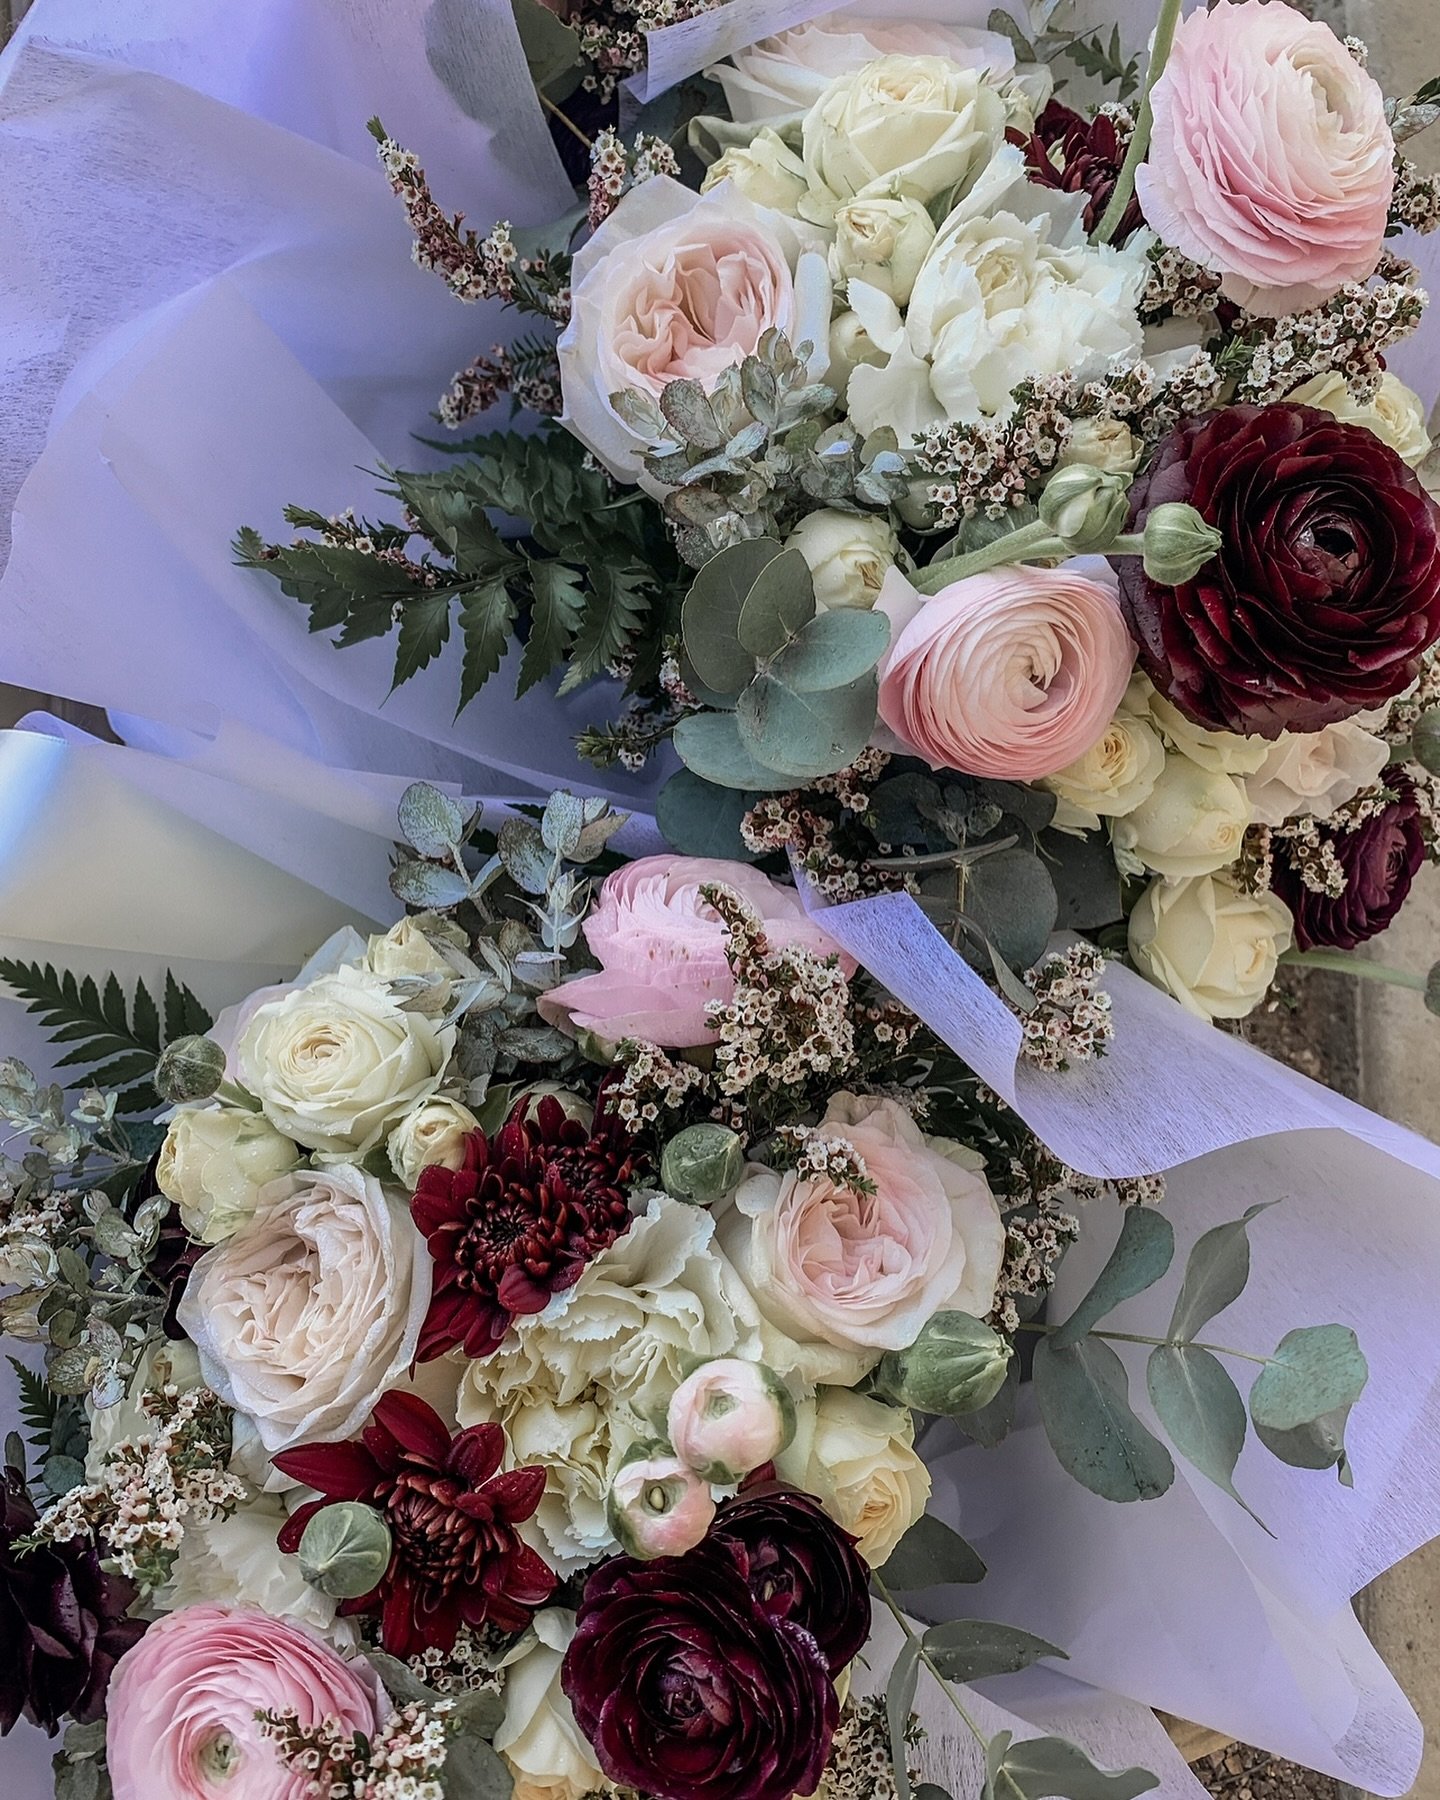 Mother&rsquo;Day - you can pre order your now. Stunning premium blooms presented in our signature wrapping &amp; delivered to your Mum this Mother&rsquo;s Day. Details are on our website.

#mothersday
#mothersdayblooms
#mothersday2024
#flowersformum
